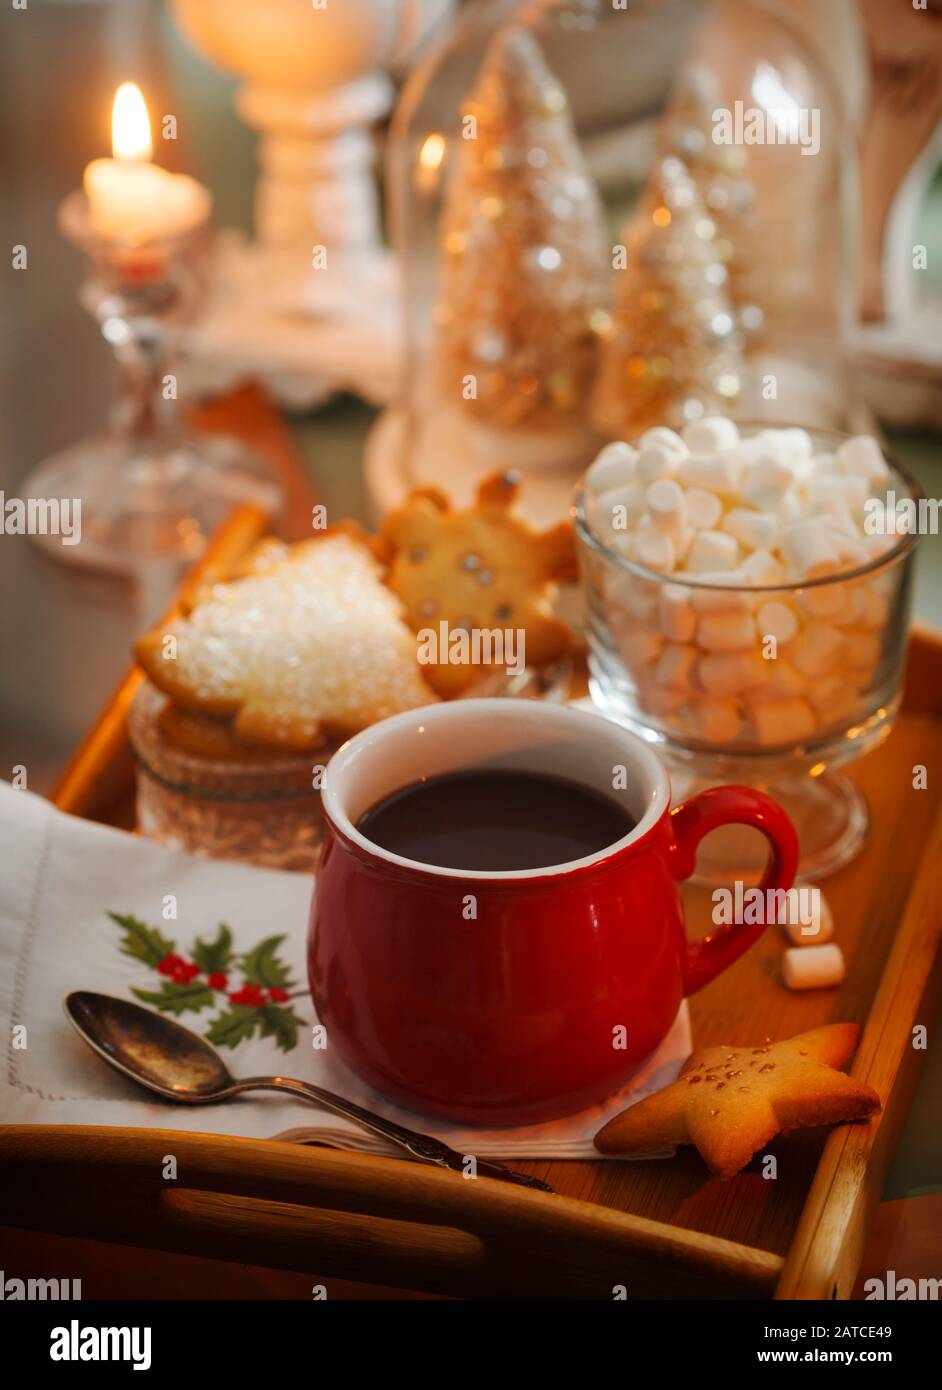 Hot chocolate with marshmallow and cookies at Christmas Stock Photo